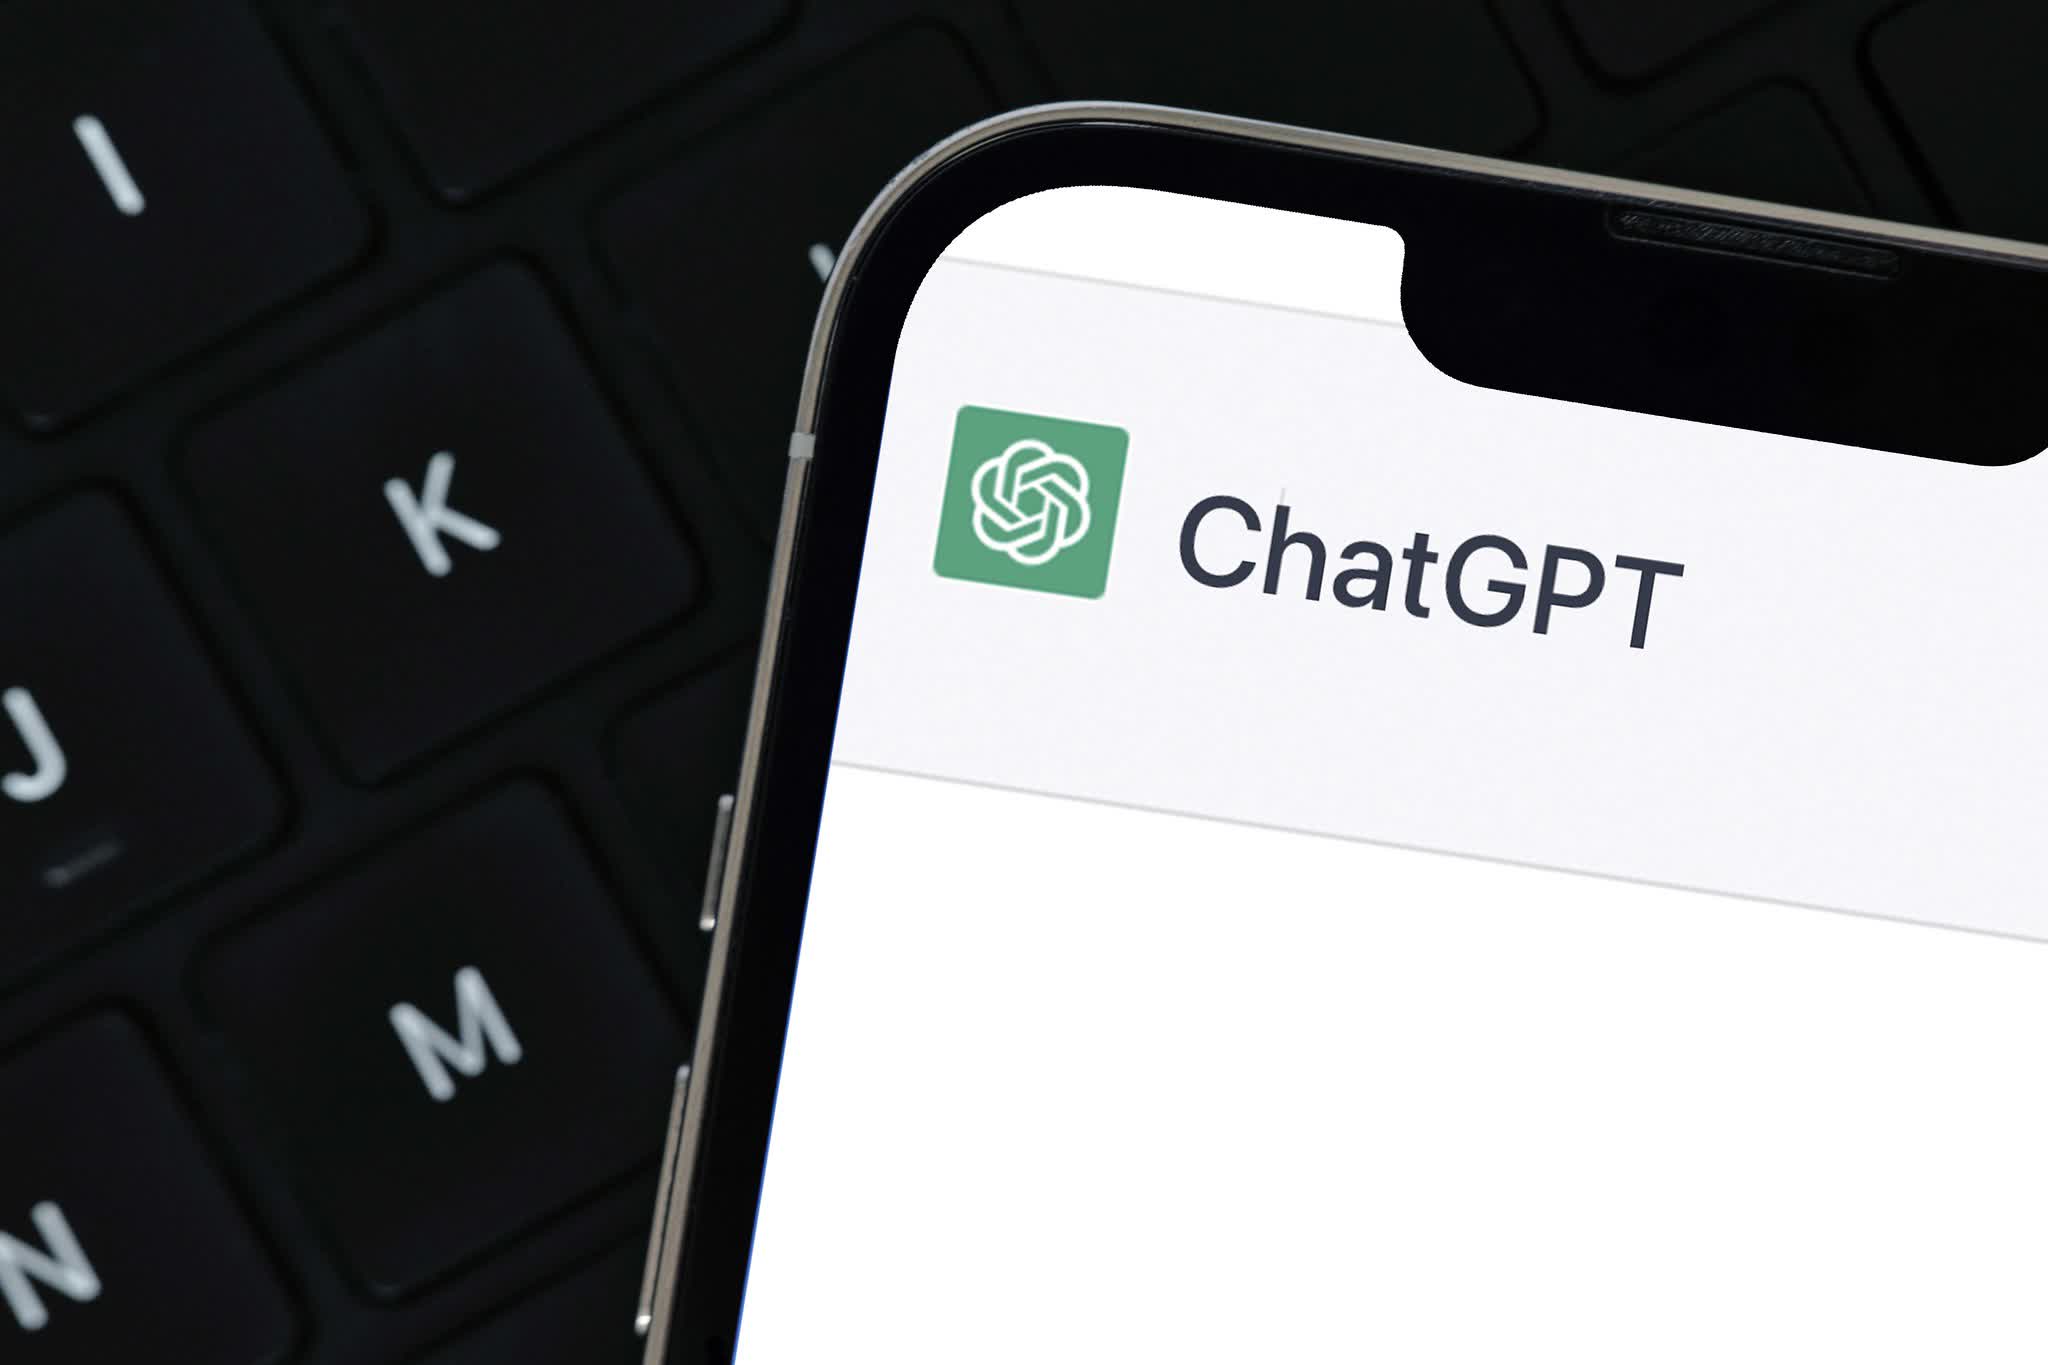 ChatGPT temporarily shut down after bug exposed users' chat histories